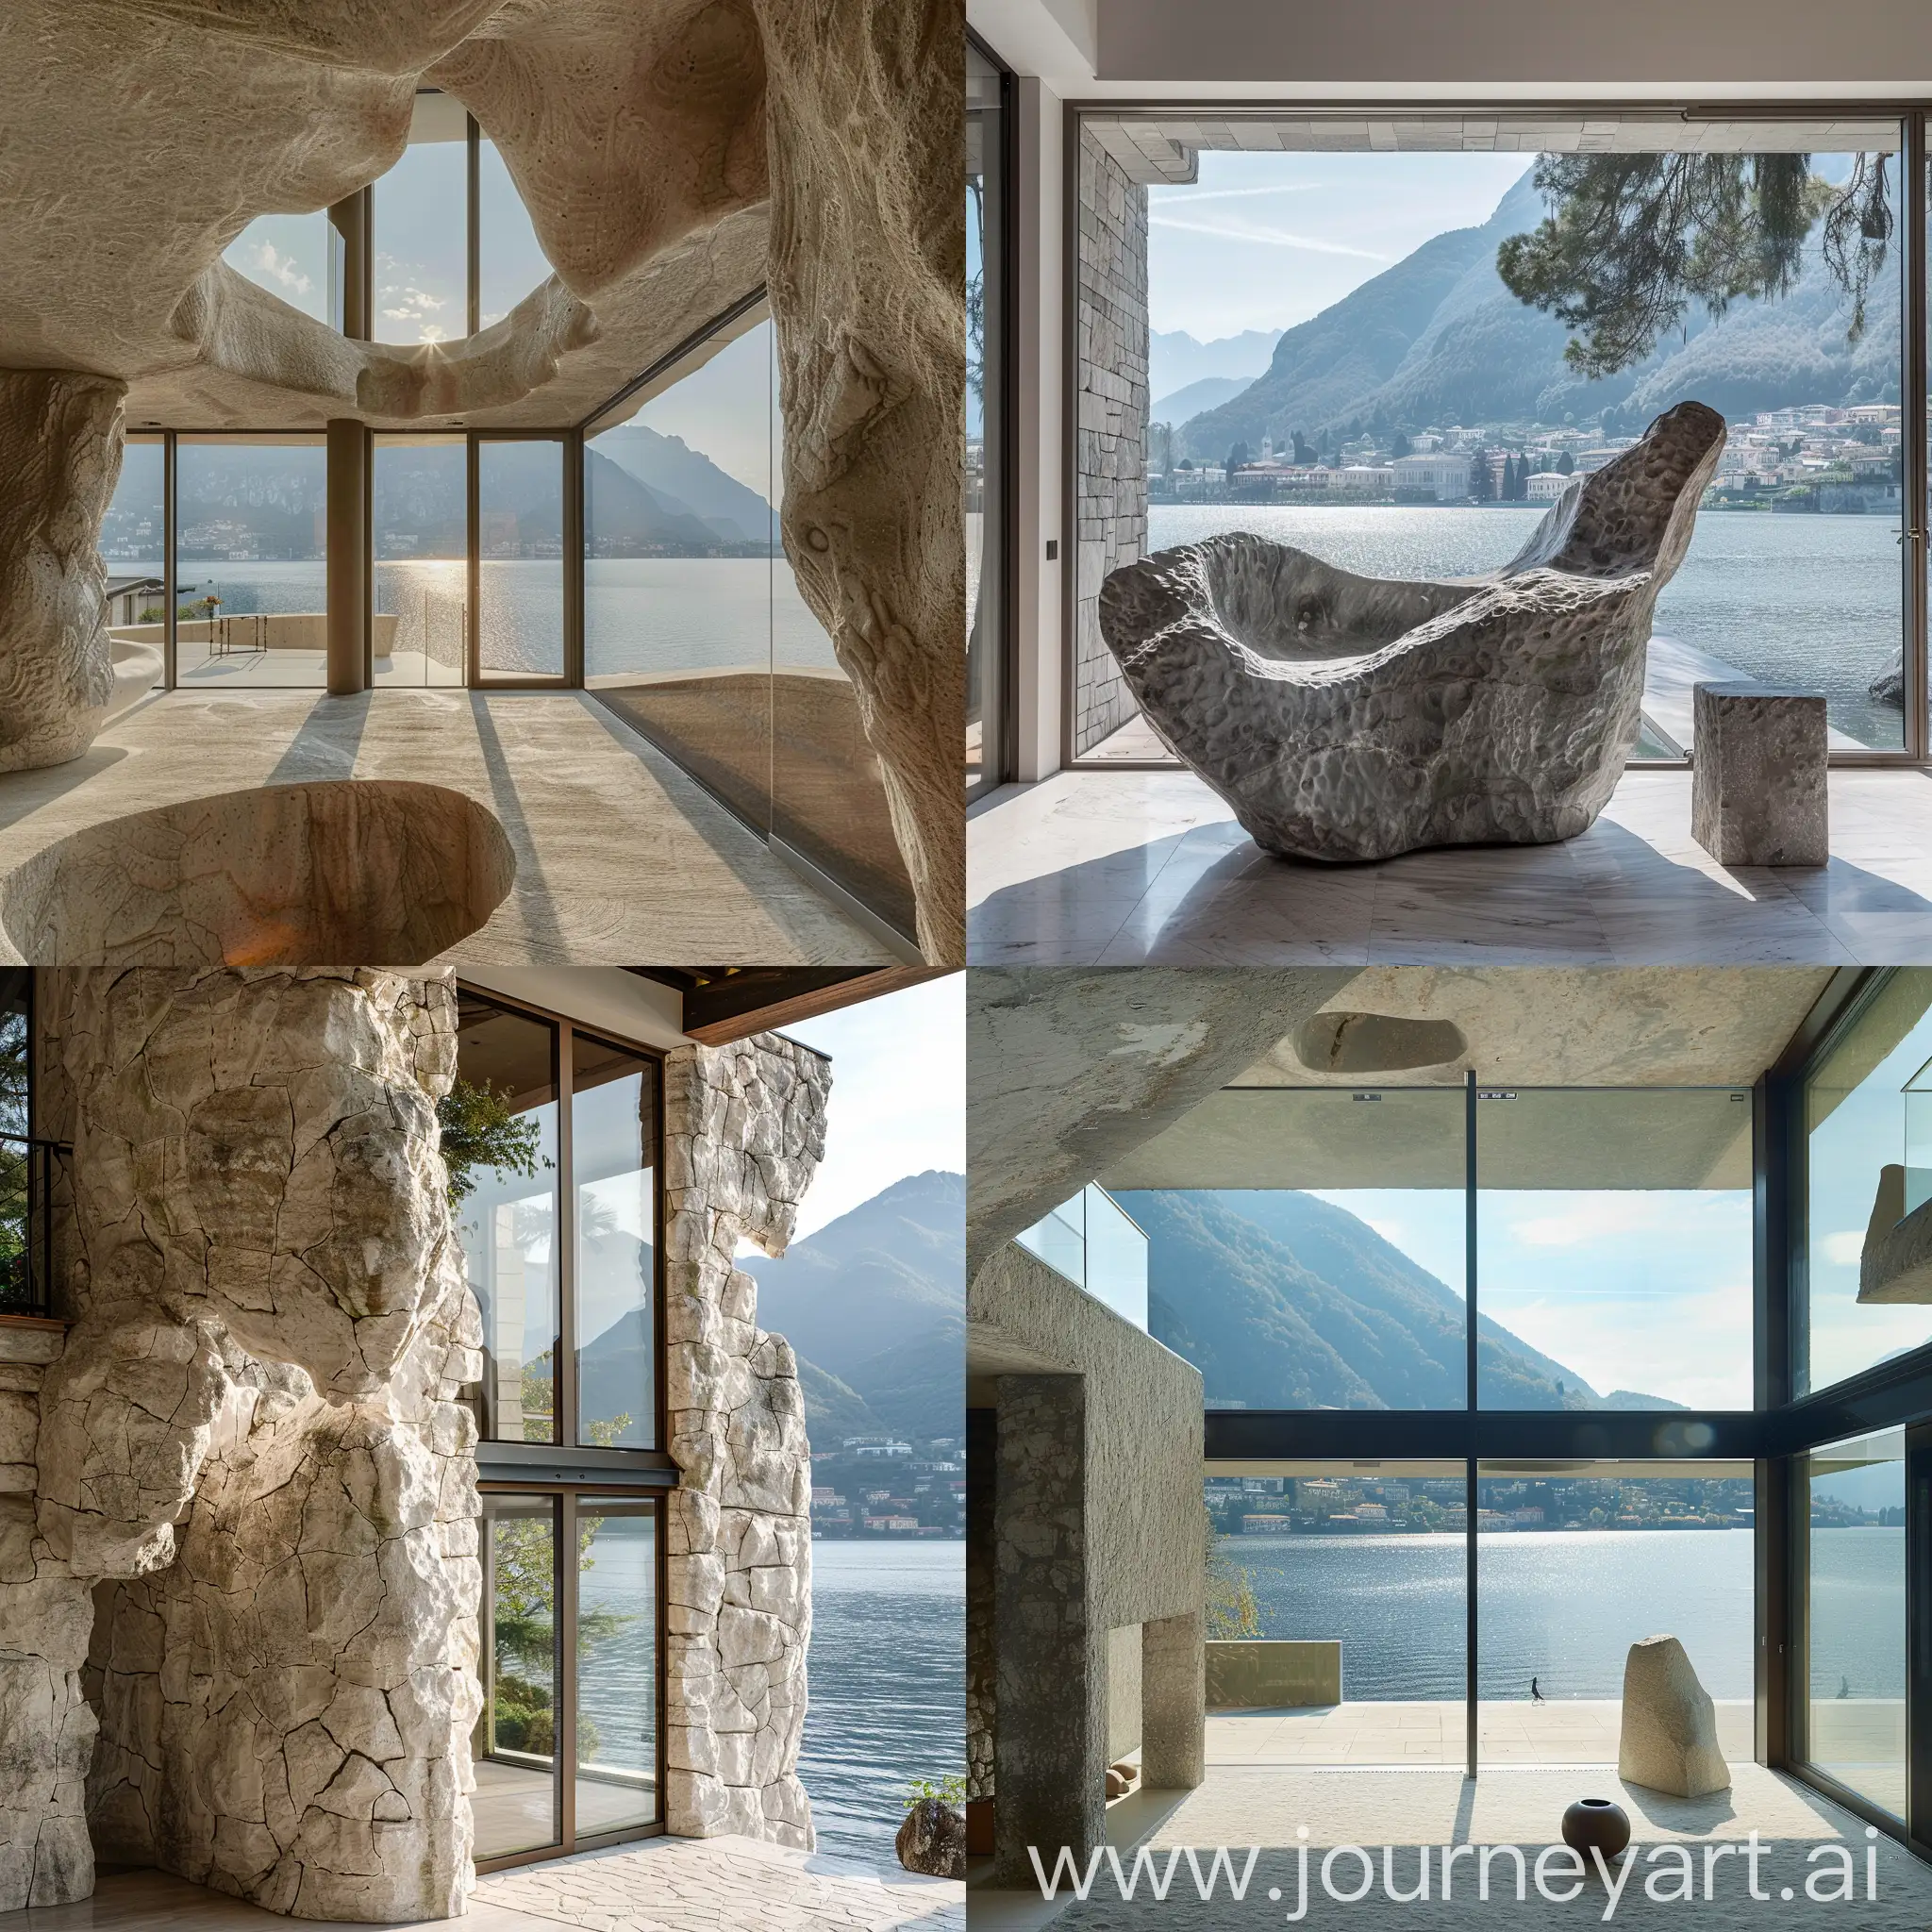 sculpture architecture , villa with stone material like born from mountain, wide window, on the water lake , daylight